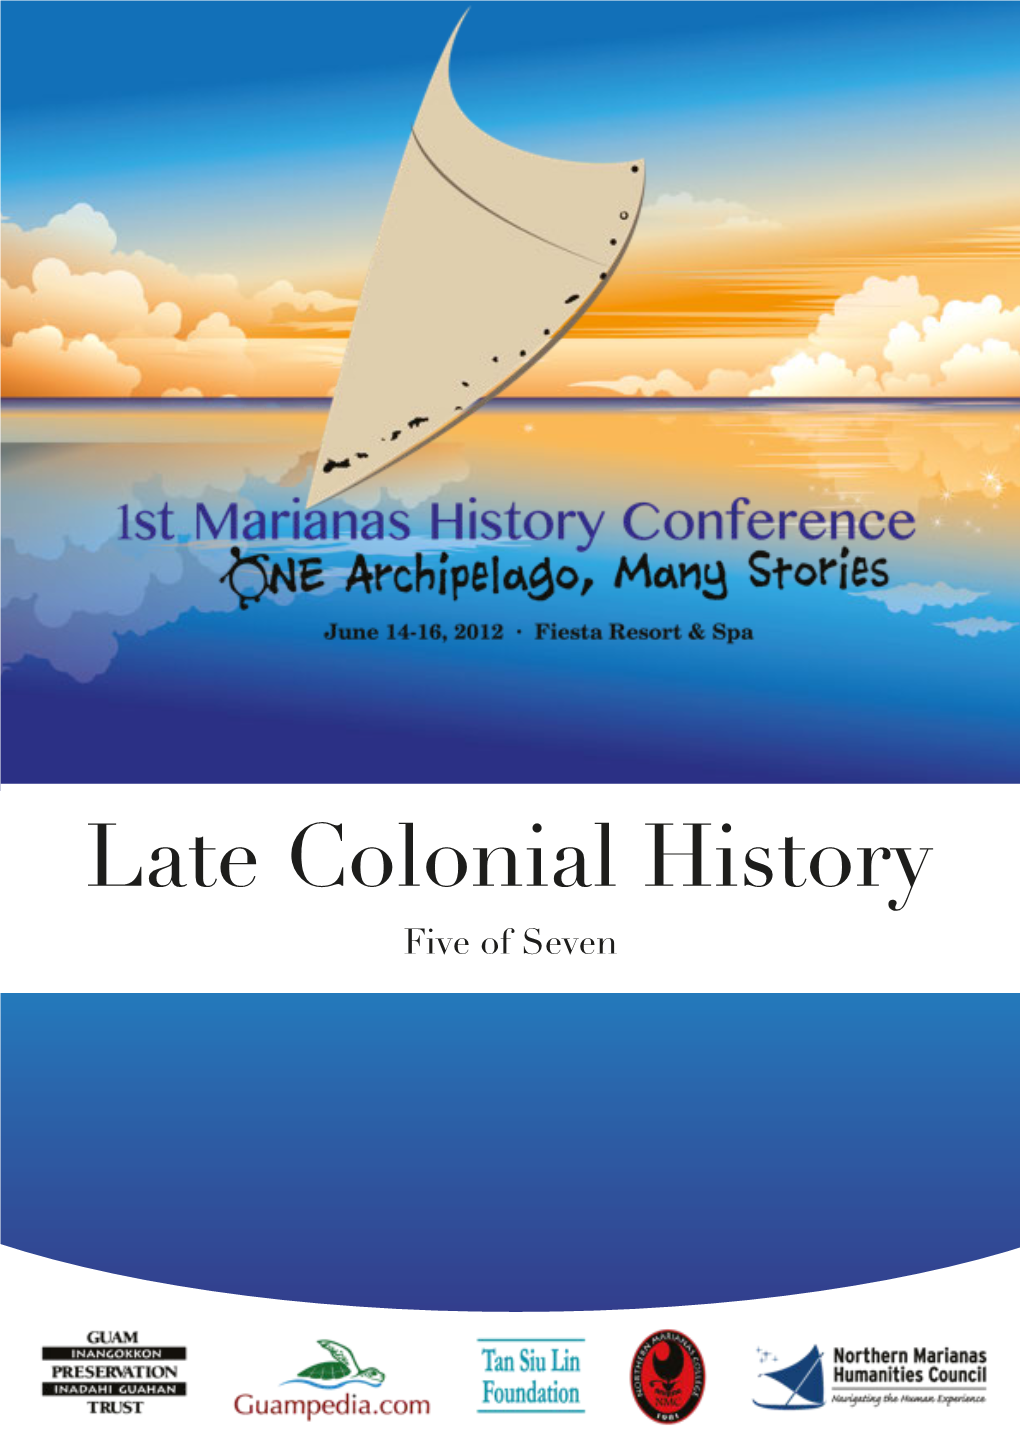 Late Colonial History Five of Seven